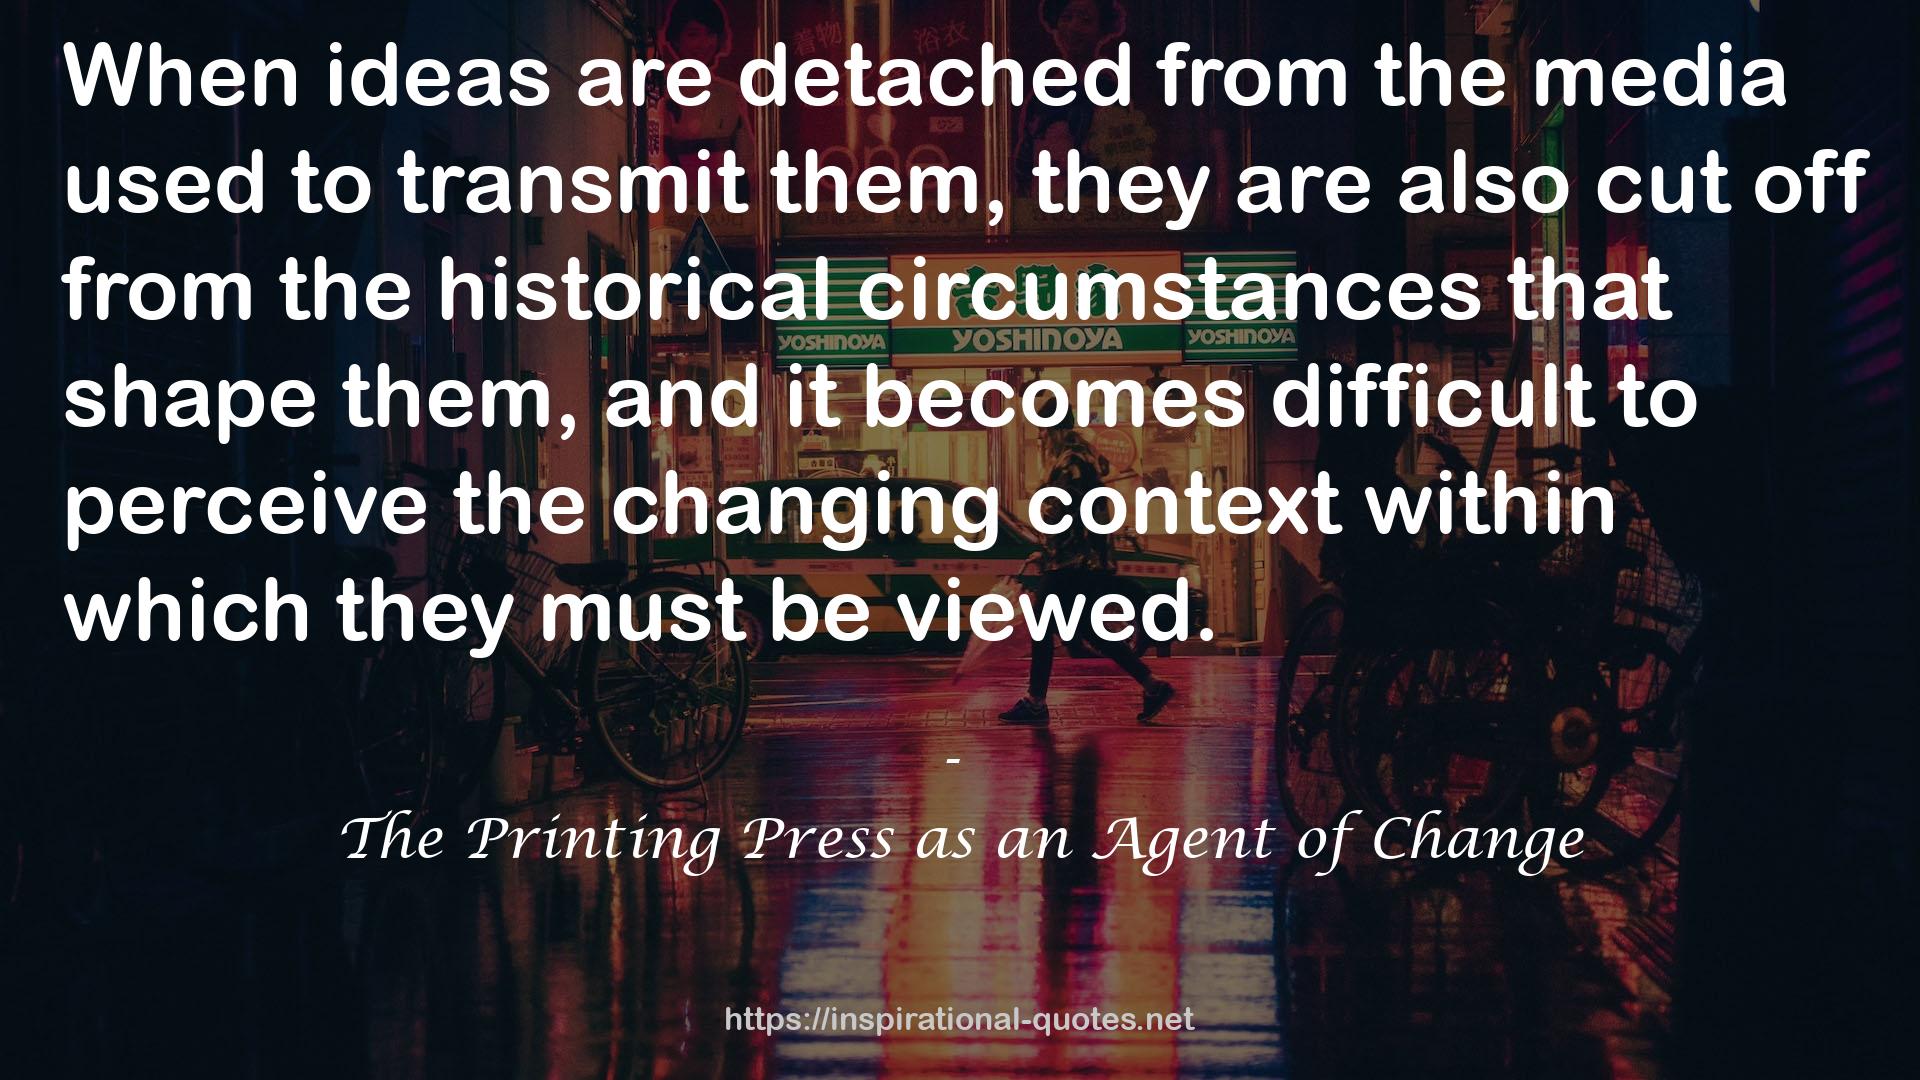 The Printing Press as an Agent of Change QUOTES